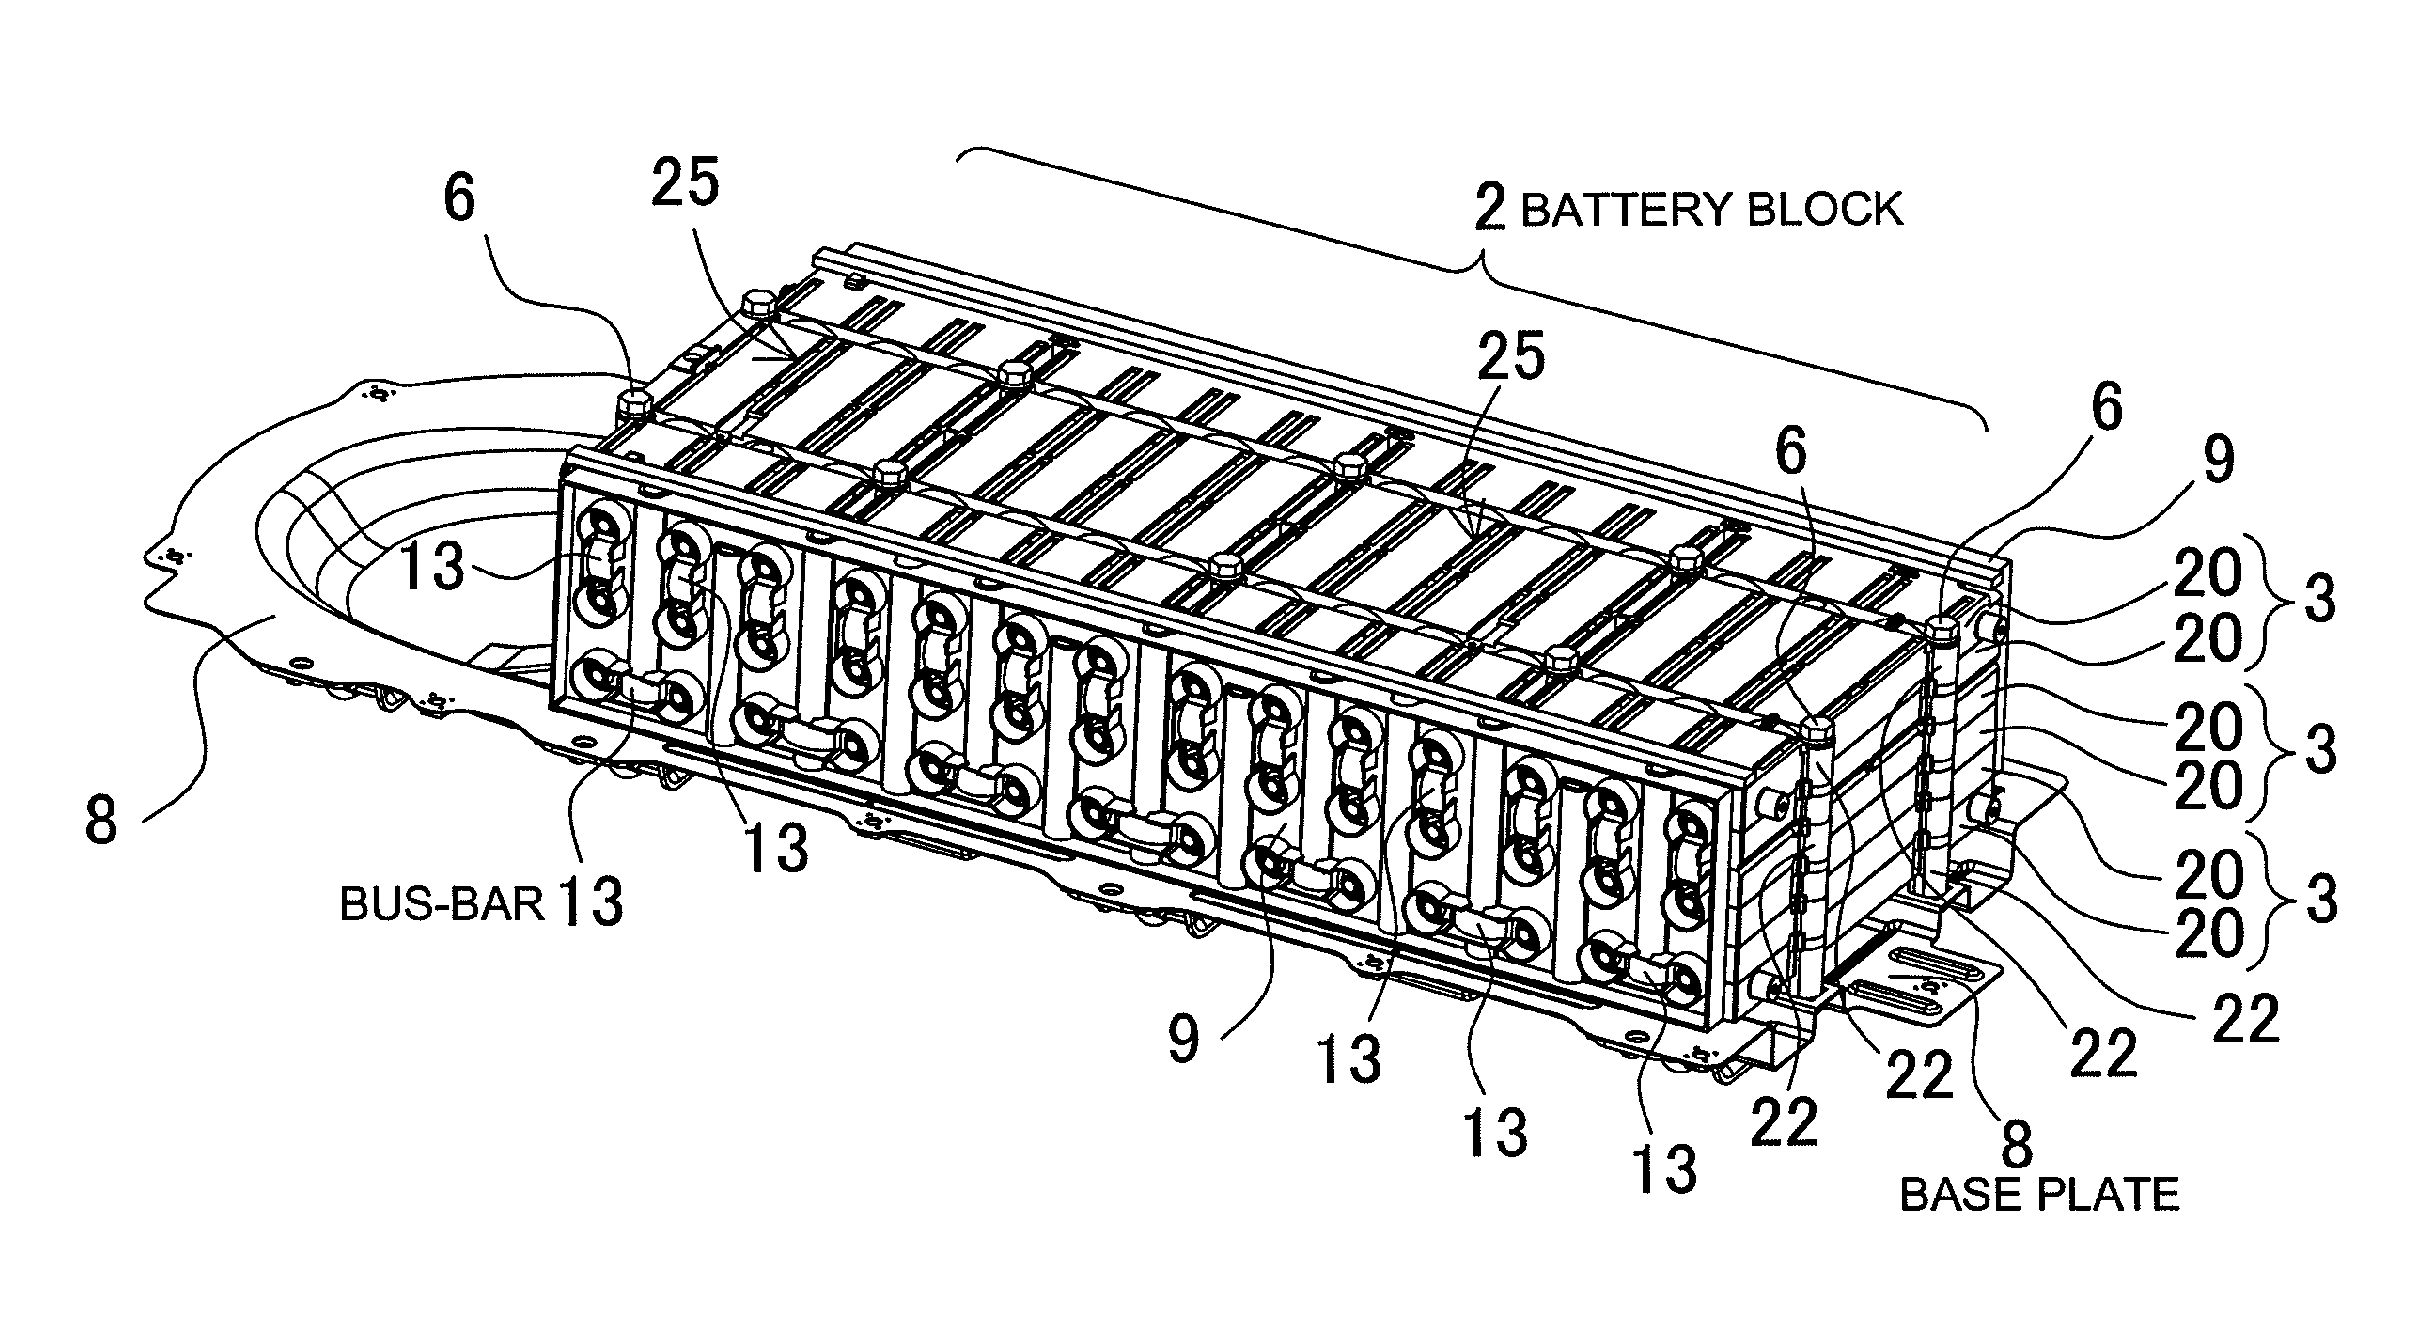 Battery system with battery holders